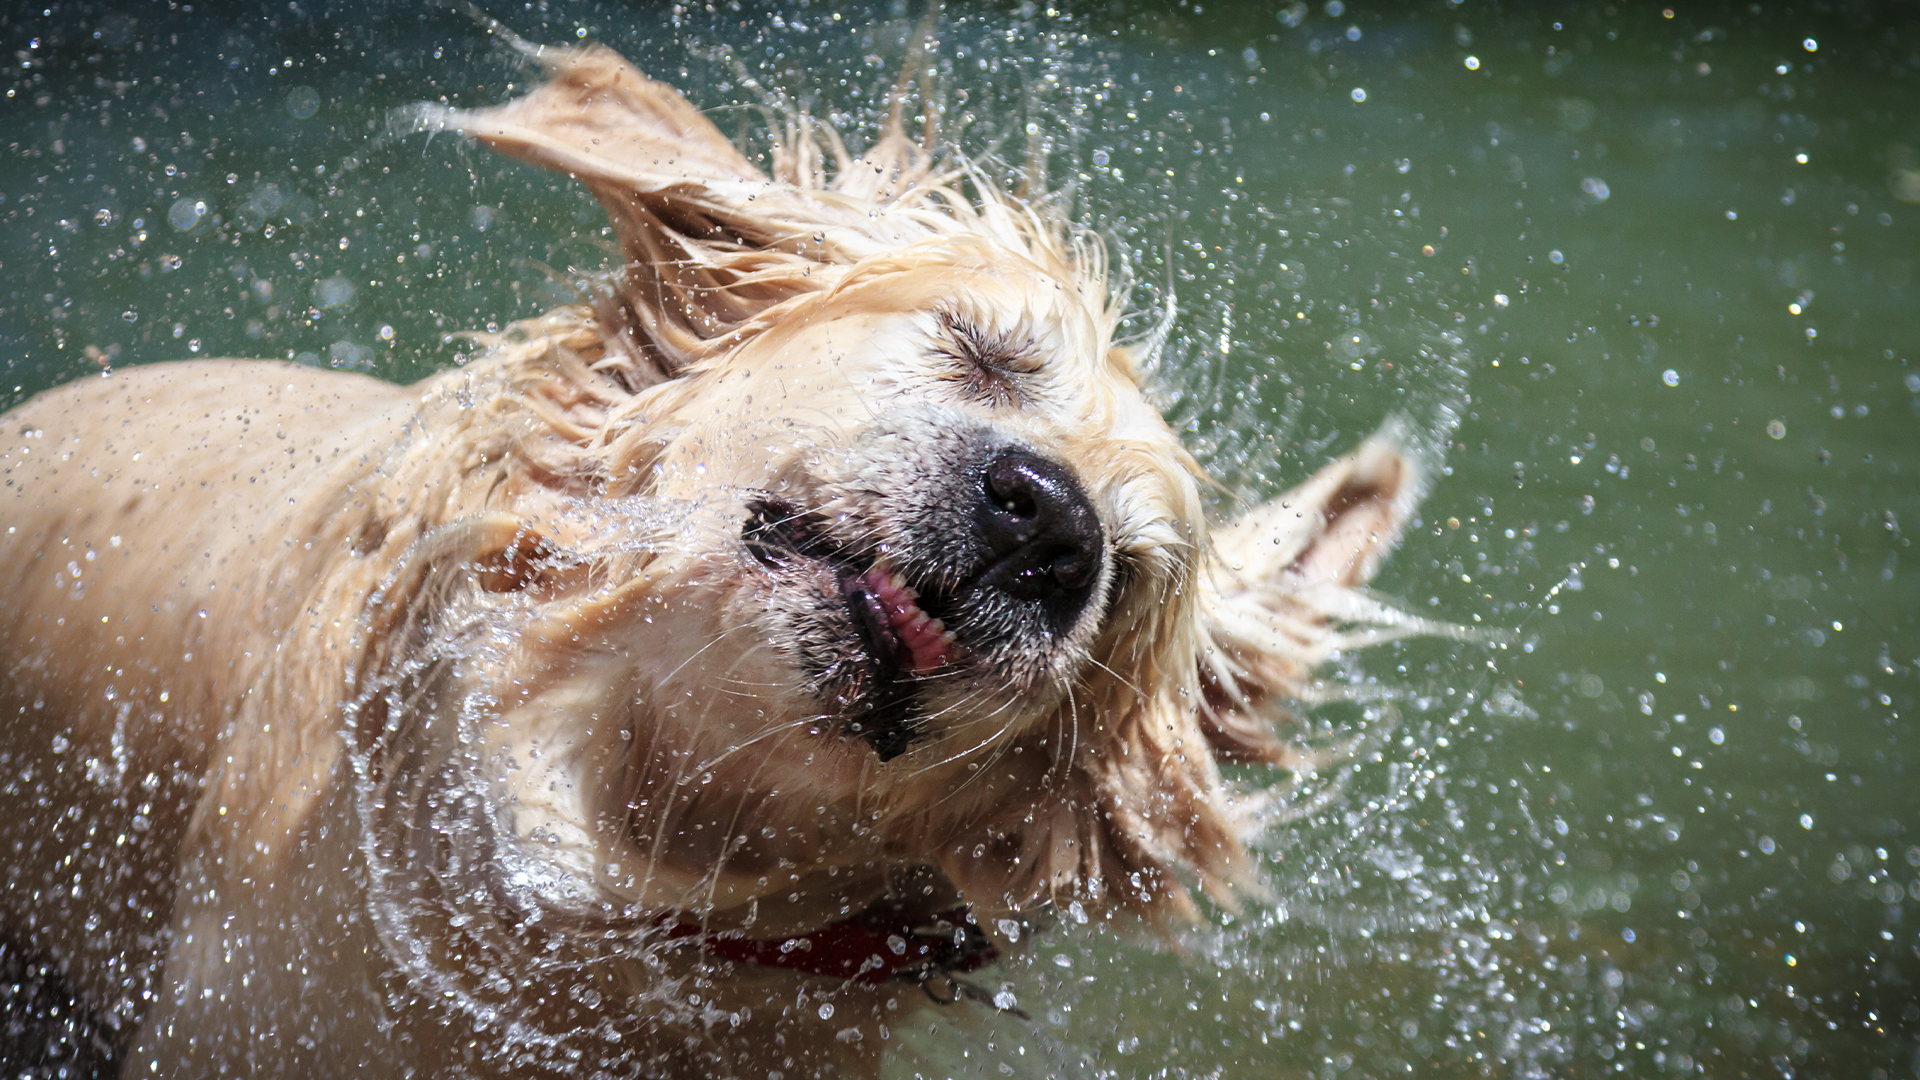 Every year, thousands of dogs die from heat exhaustion and being left in hot cars. It's a tragedy that is caused by ignorance or negligence. The good news is that you can help your dog stay safe this summer with these 6 tips!